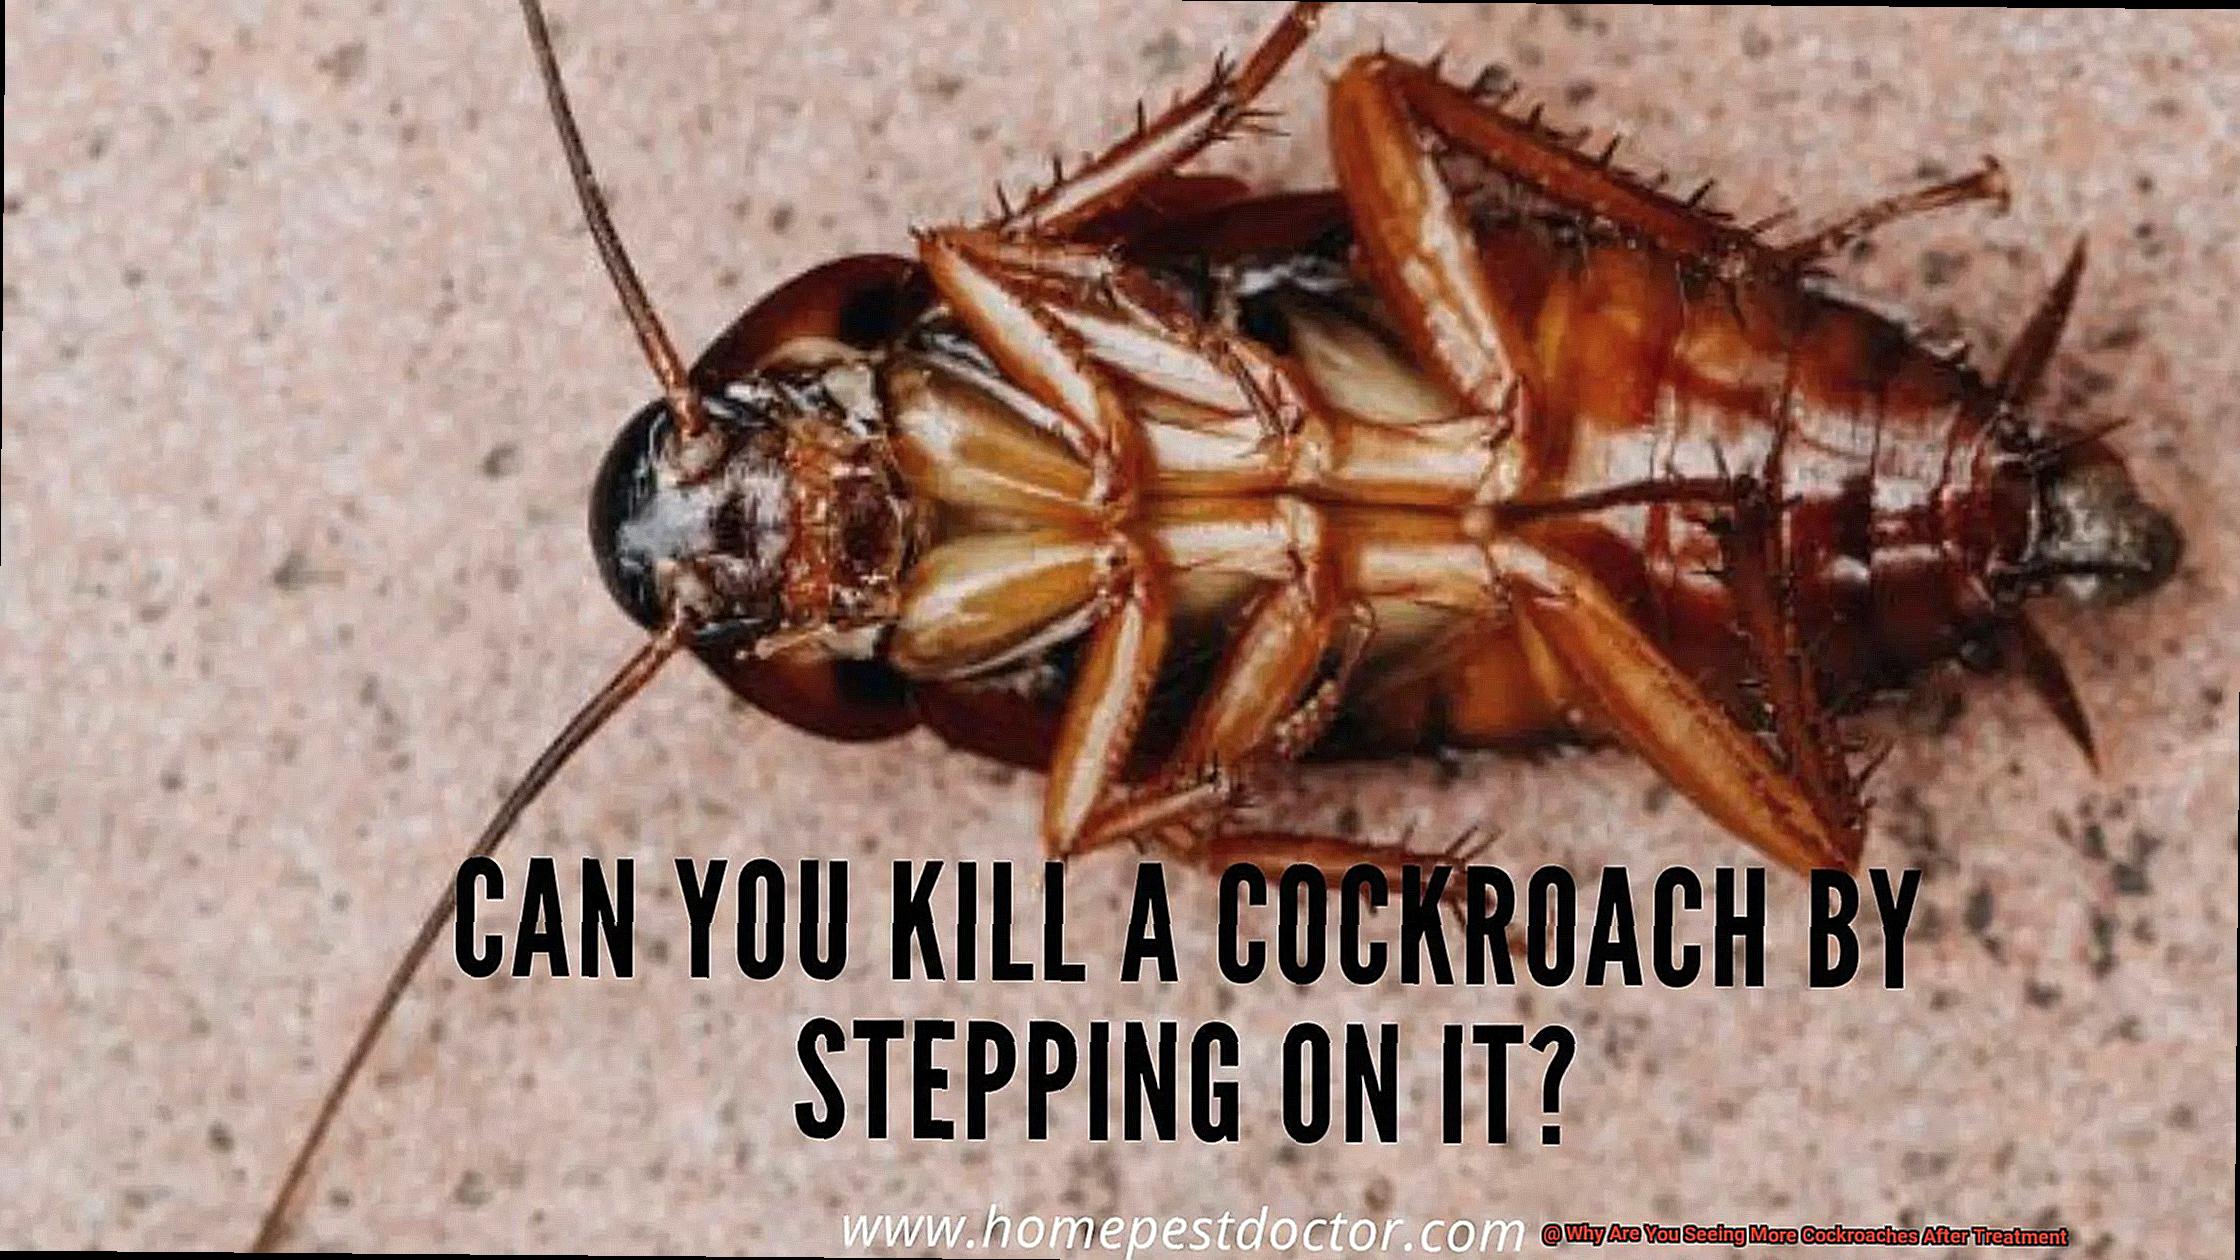 Why Are You Seeing More Cockroaches After Treatment-8